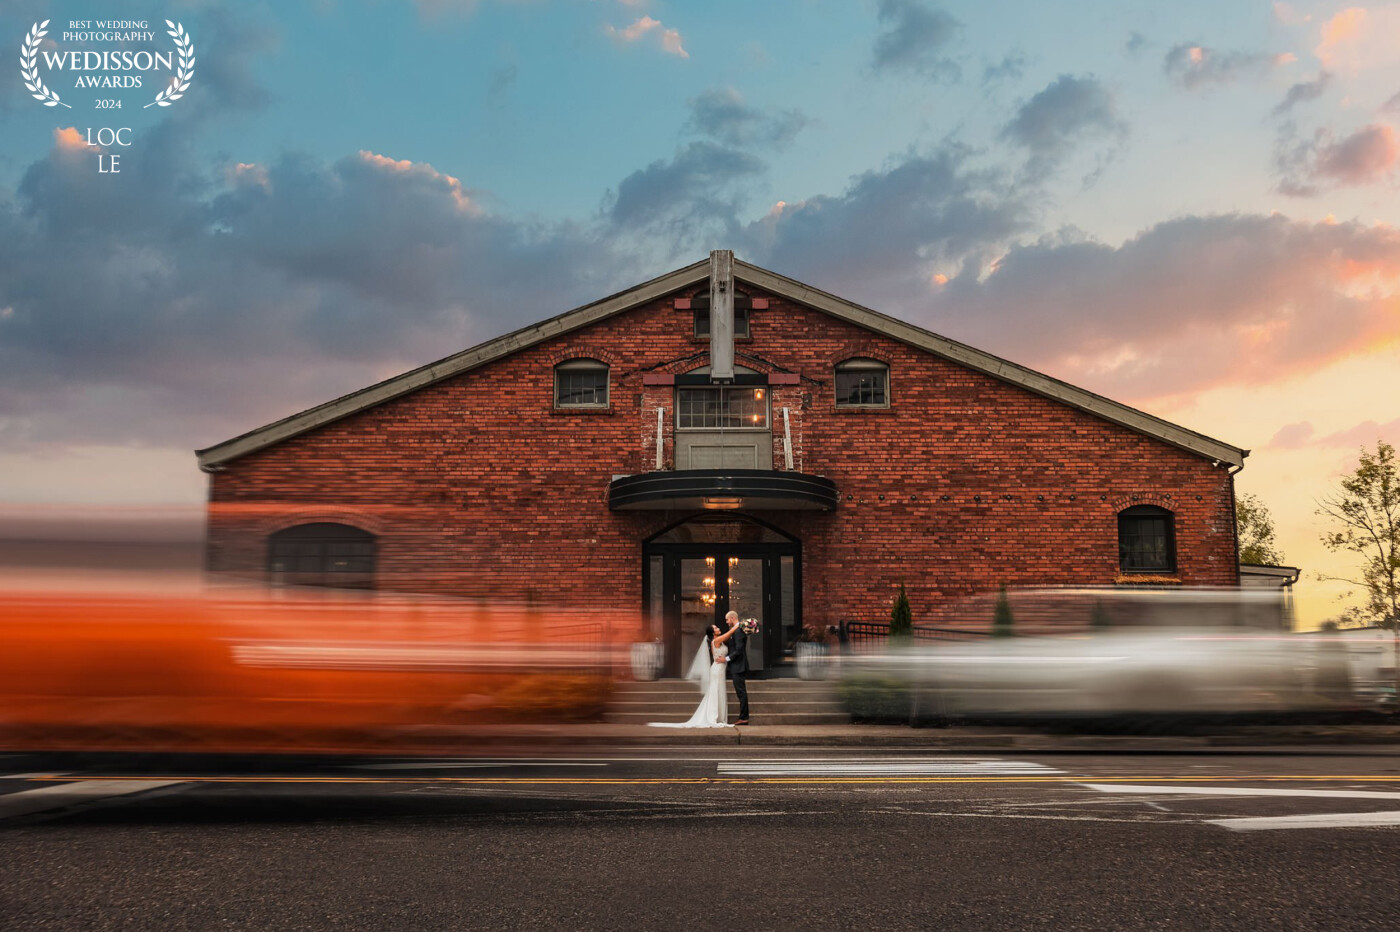 Embracing their special day amidst the vibrant downtown vibes. The magic of long exposure captures their love, creating a stunning frame with passing cars.